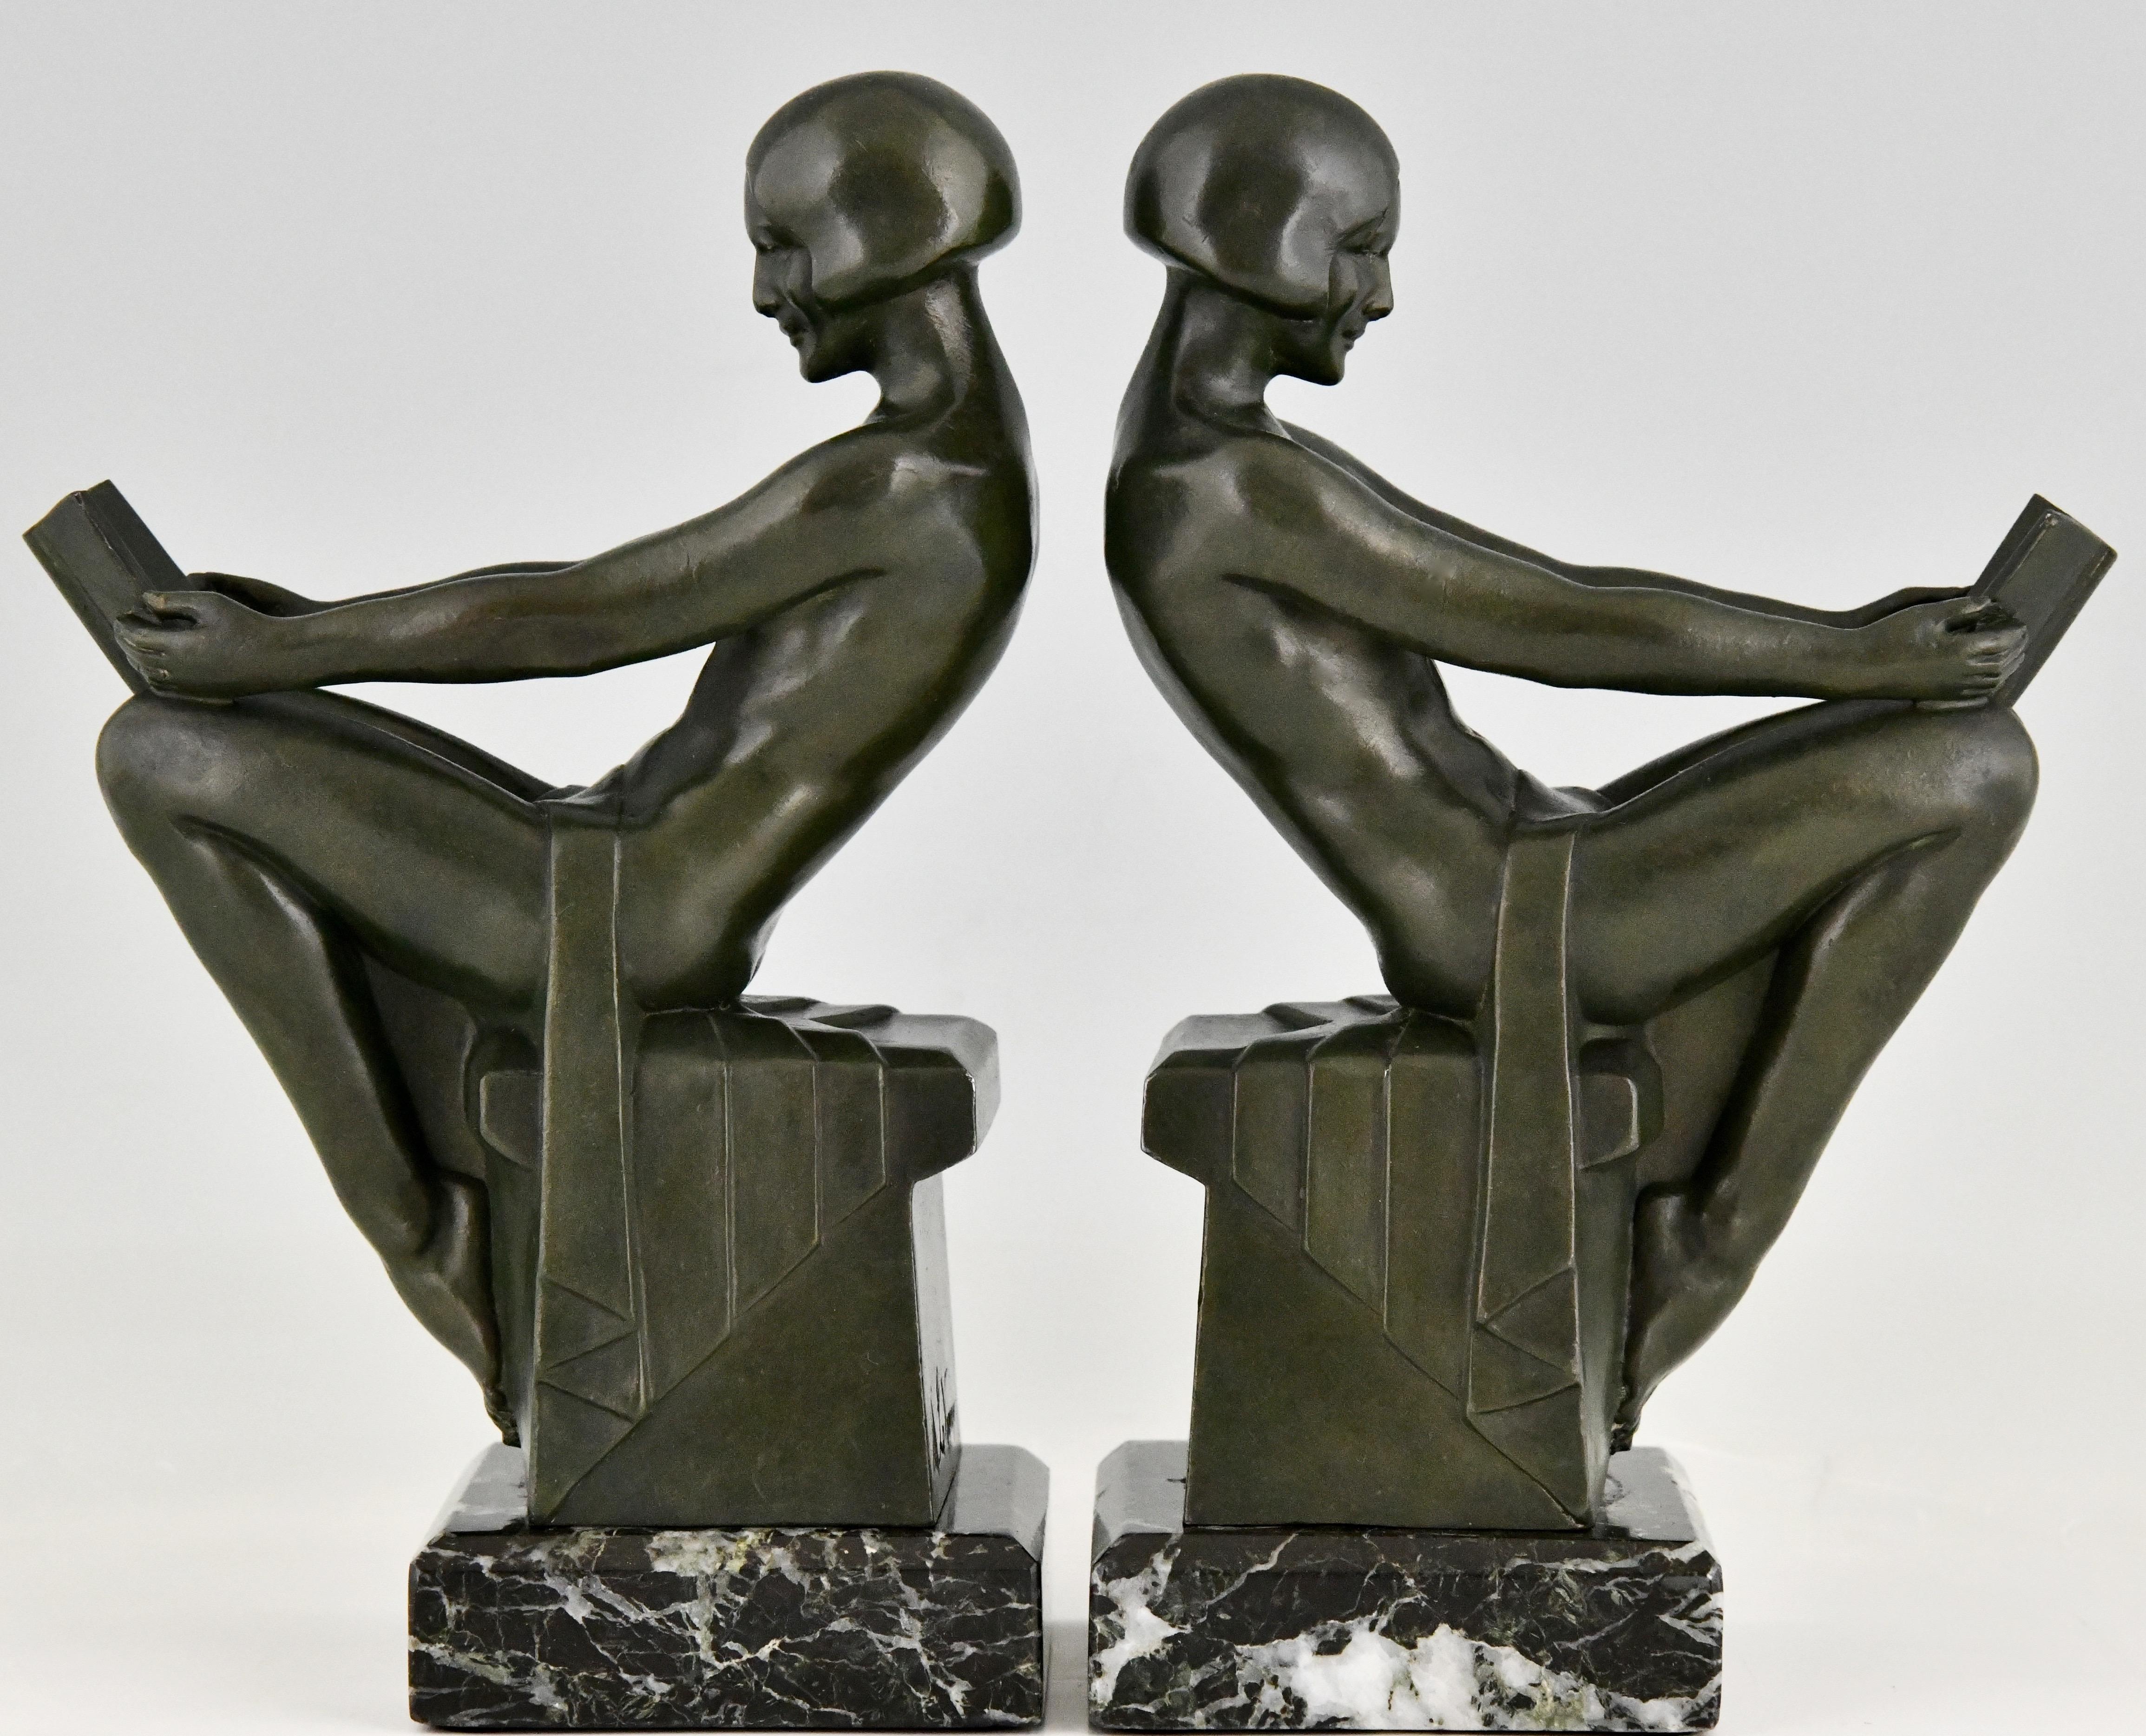 Art Deco bookends with reading nudes Delassement. By Max Le Verrier. Patinated Art Metal on green marble base. France c. 1930.

Literature:
Statuettes of the Art Deco period by Alberto Shayo. Art Deco sculpture by Victor Arwas, Academy. Bronzes,